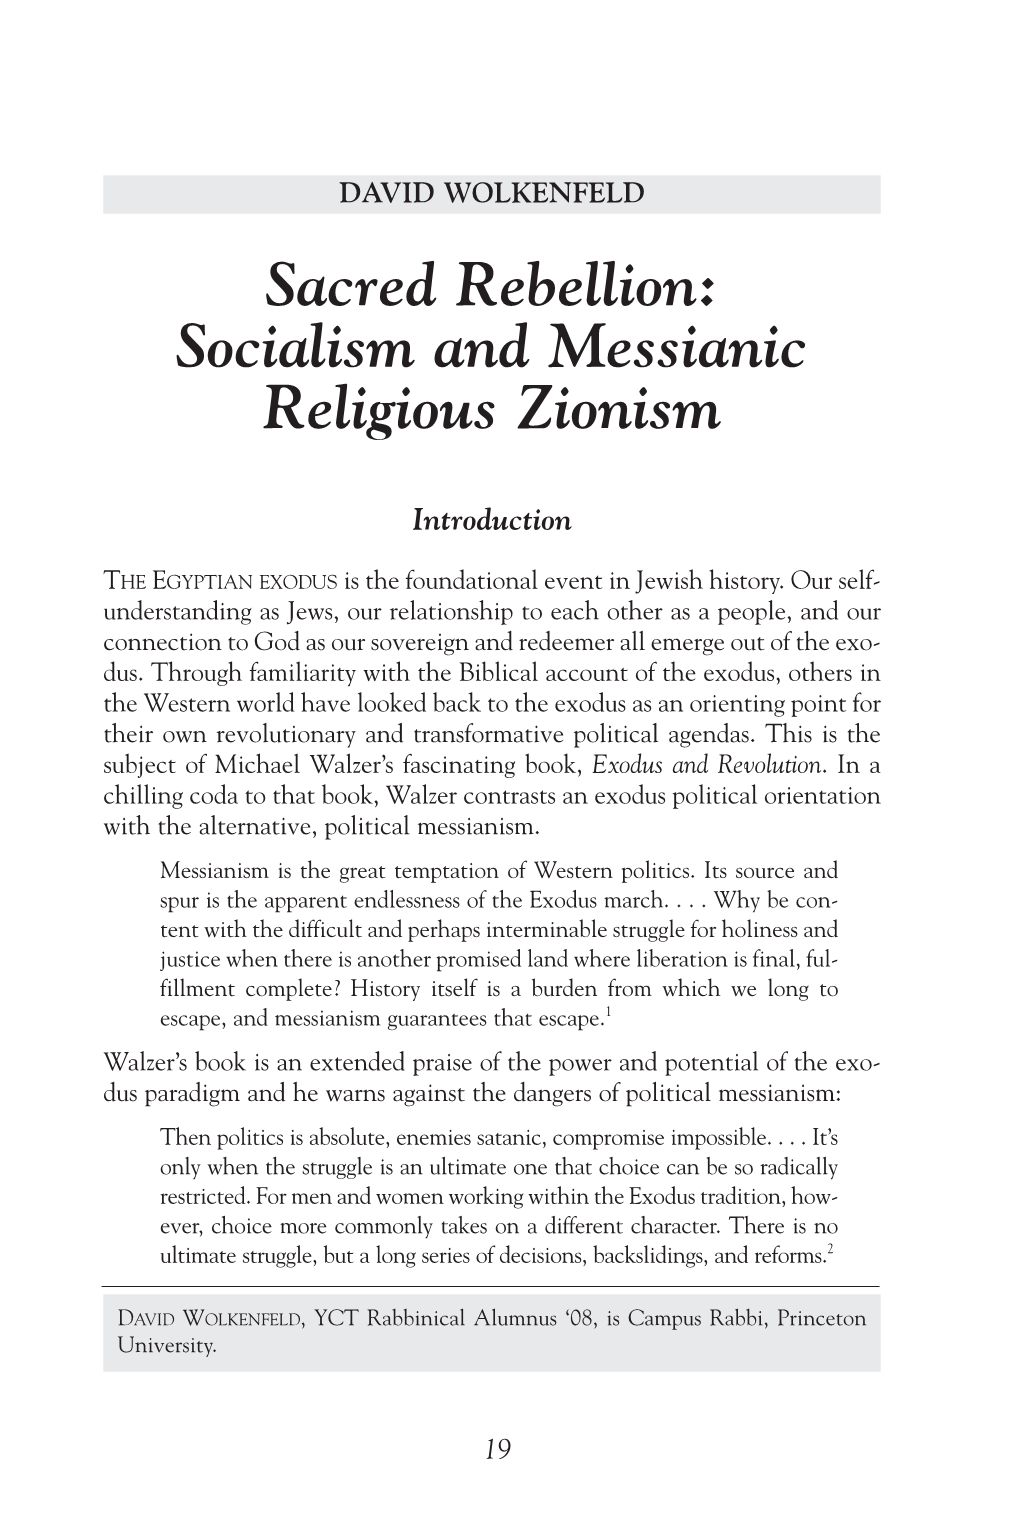 Socialism and Messianic Religious Zionism